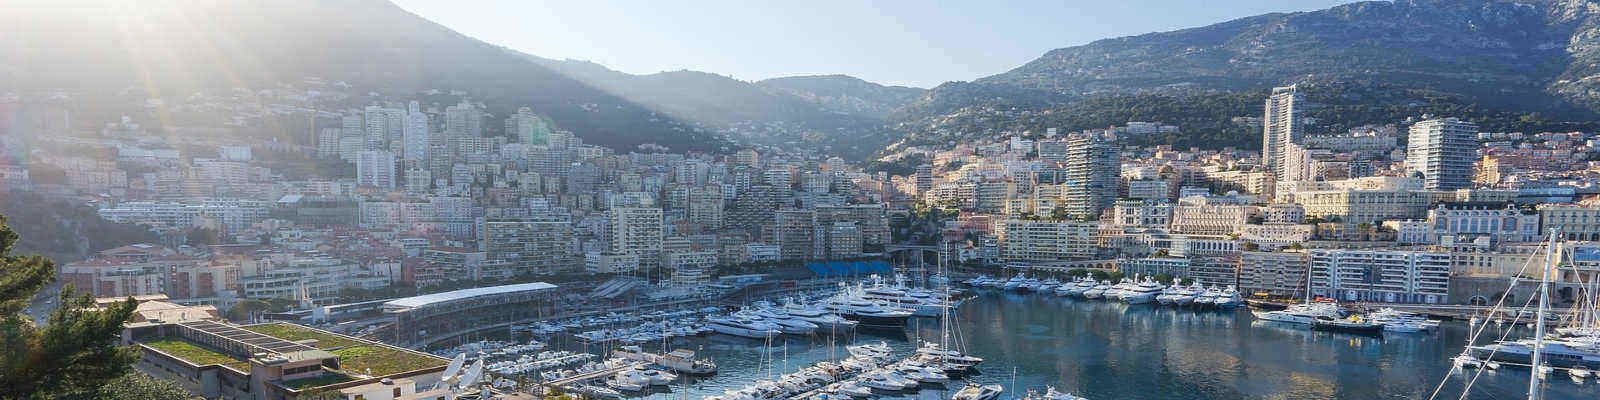 Coveted-views-of-monte-carlo-on-the-cote-dAzur